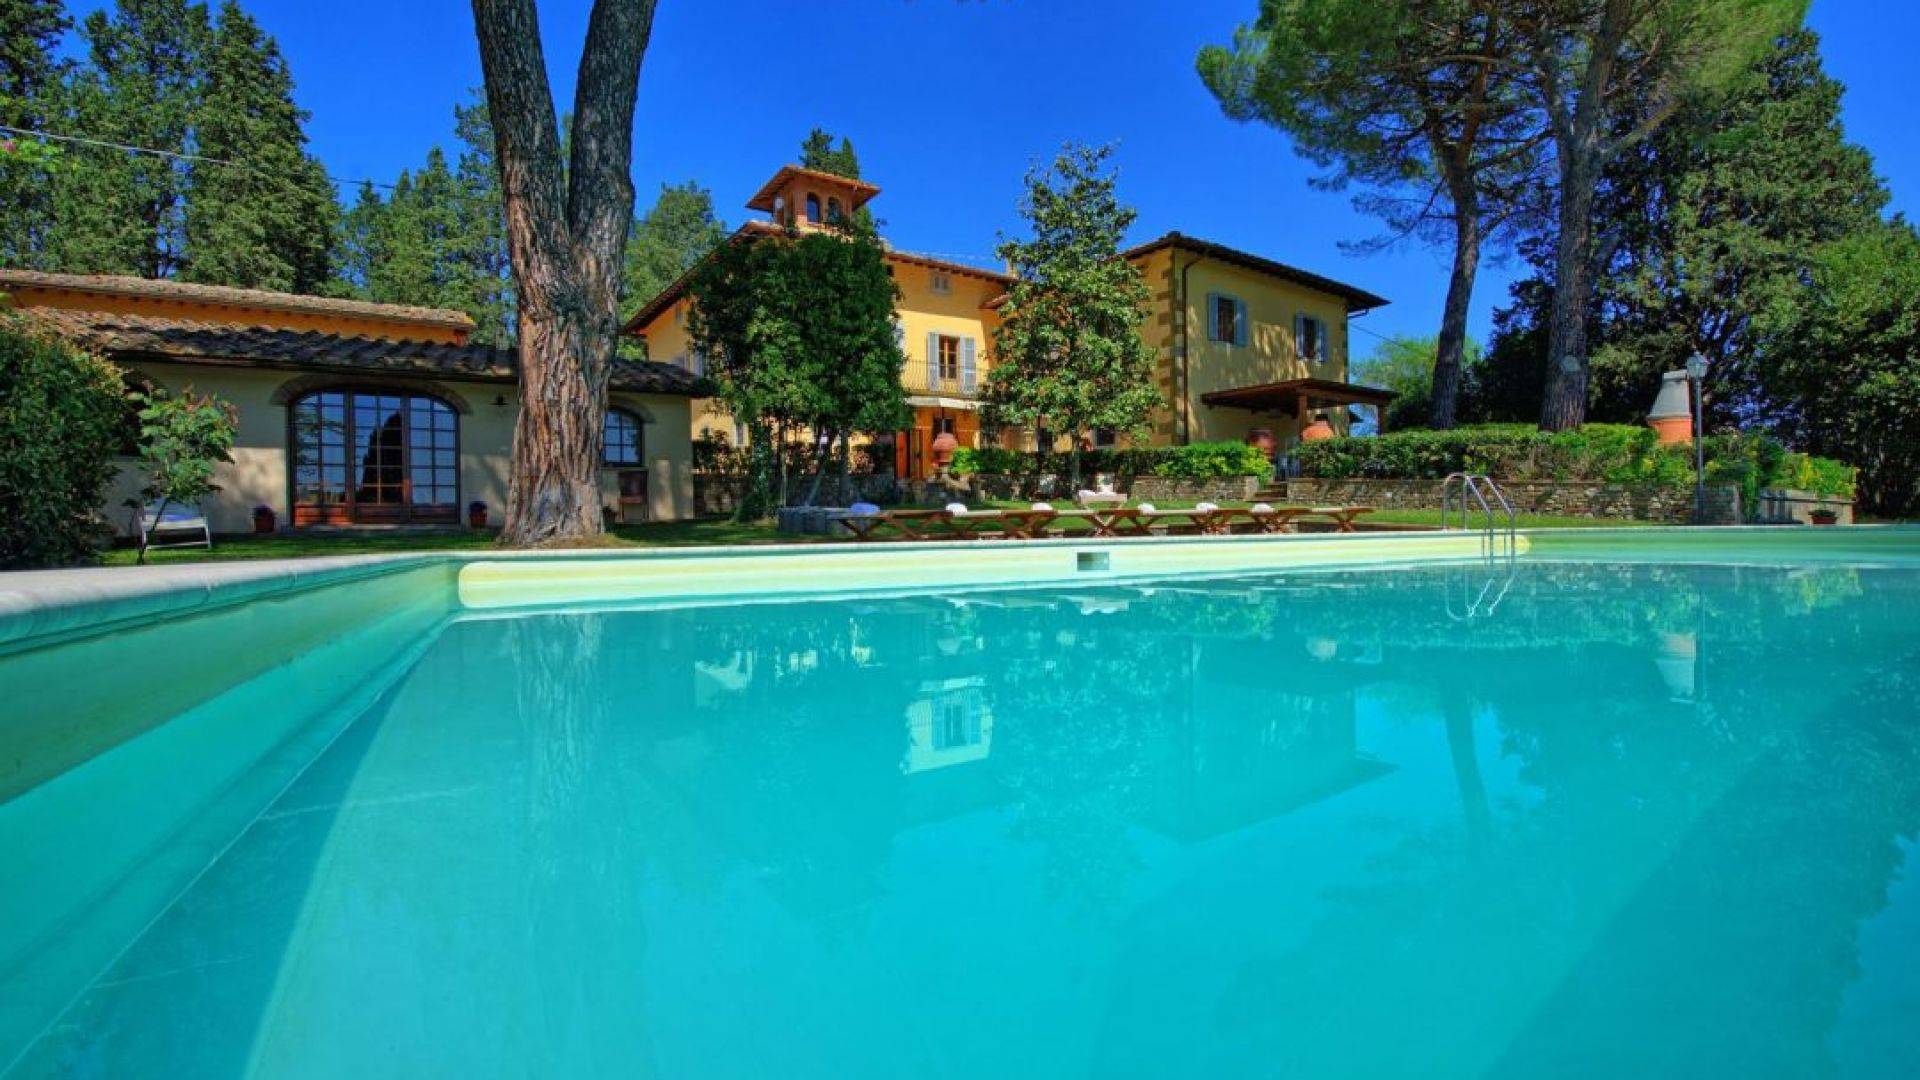 This luxury, 17th century villa is for sale with annexes, chapel, swimming pool and land in Chianti, a few kilometres from Barberino Val d’Elsa.